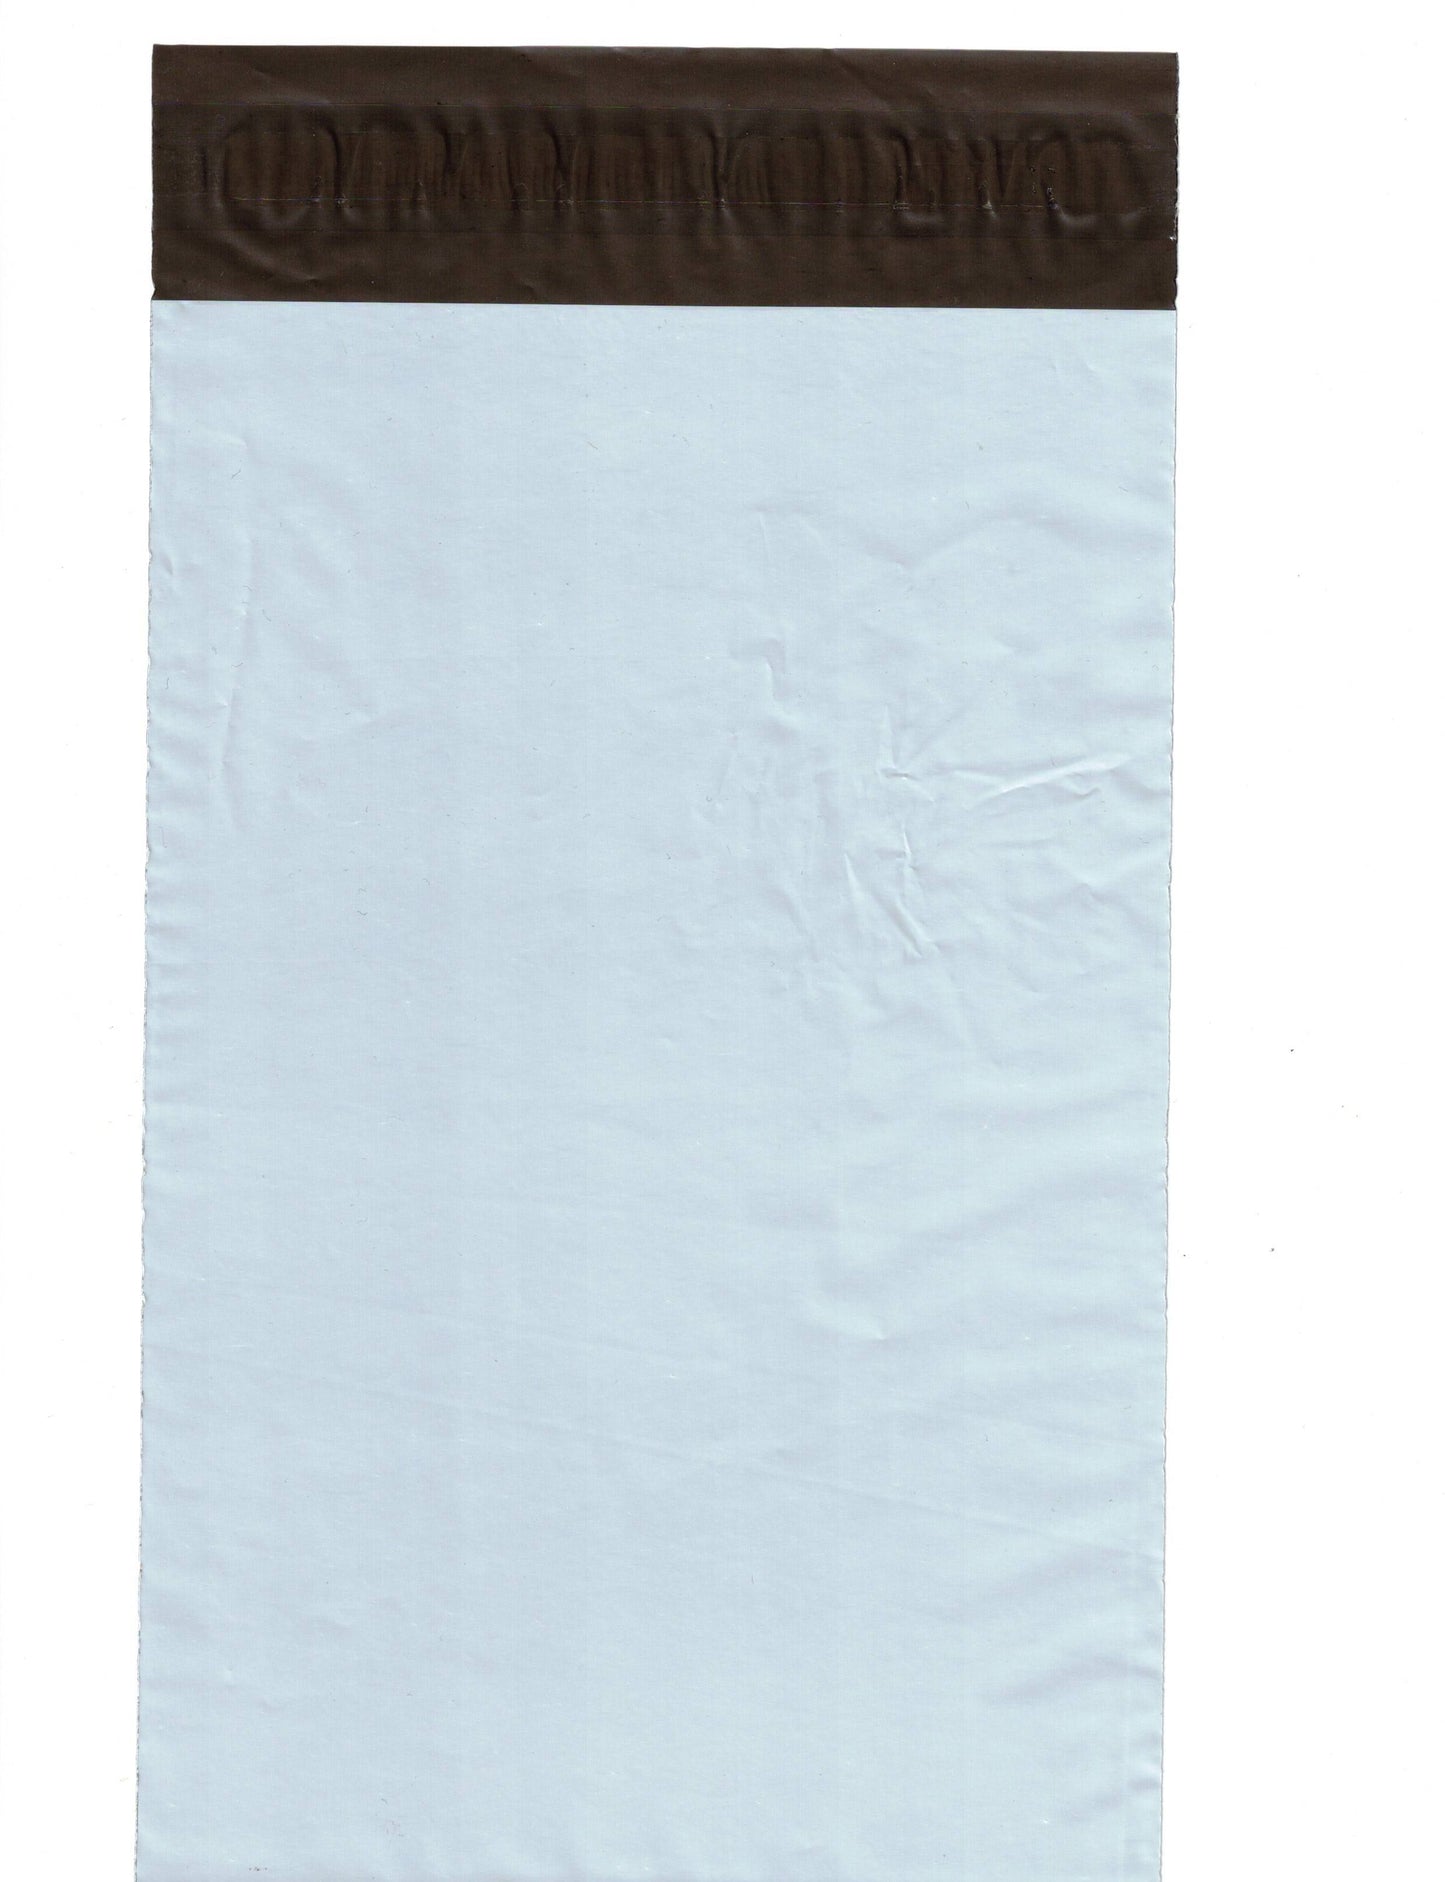 5 Pack 10"x13" Poly Mailer, Sets of 100 (White/Gray) - Self Sealing Mailing Bag Strong & Opaque